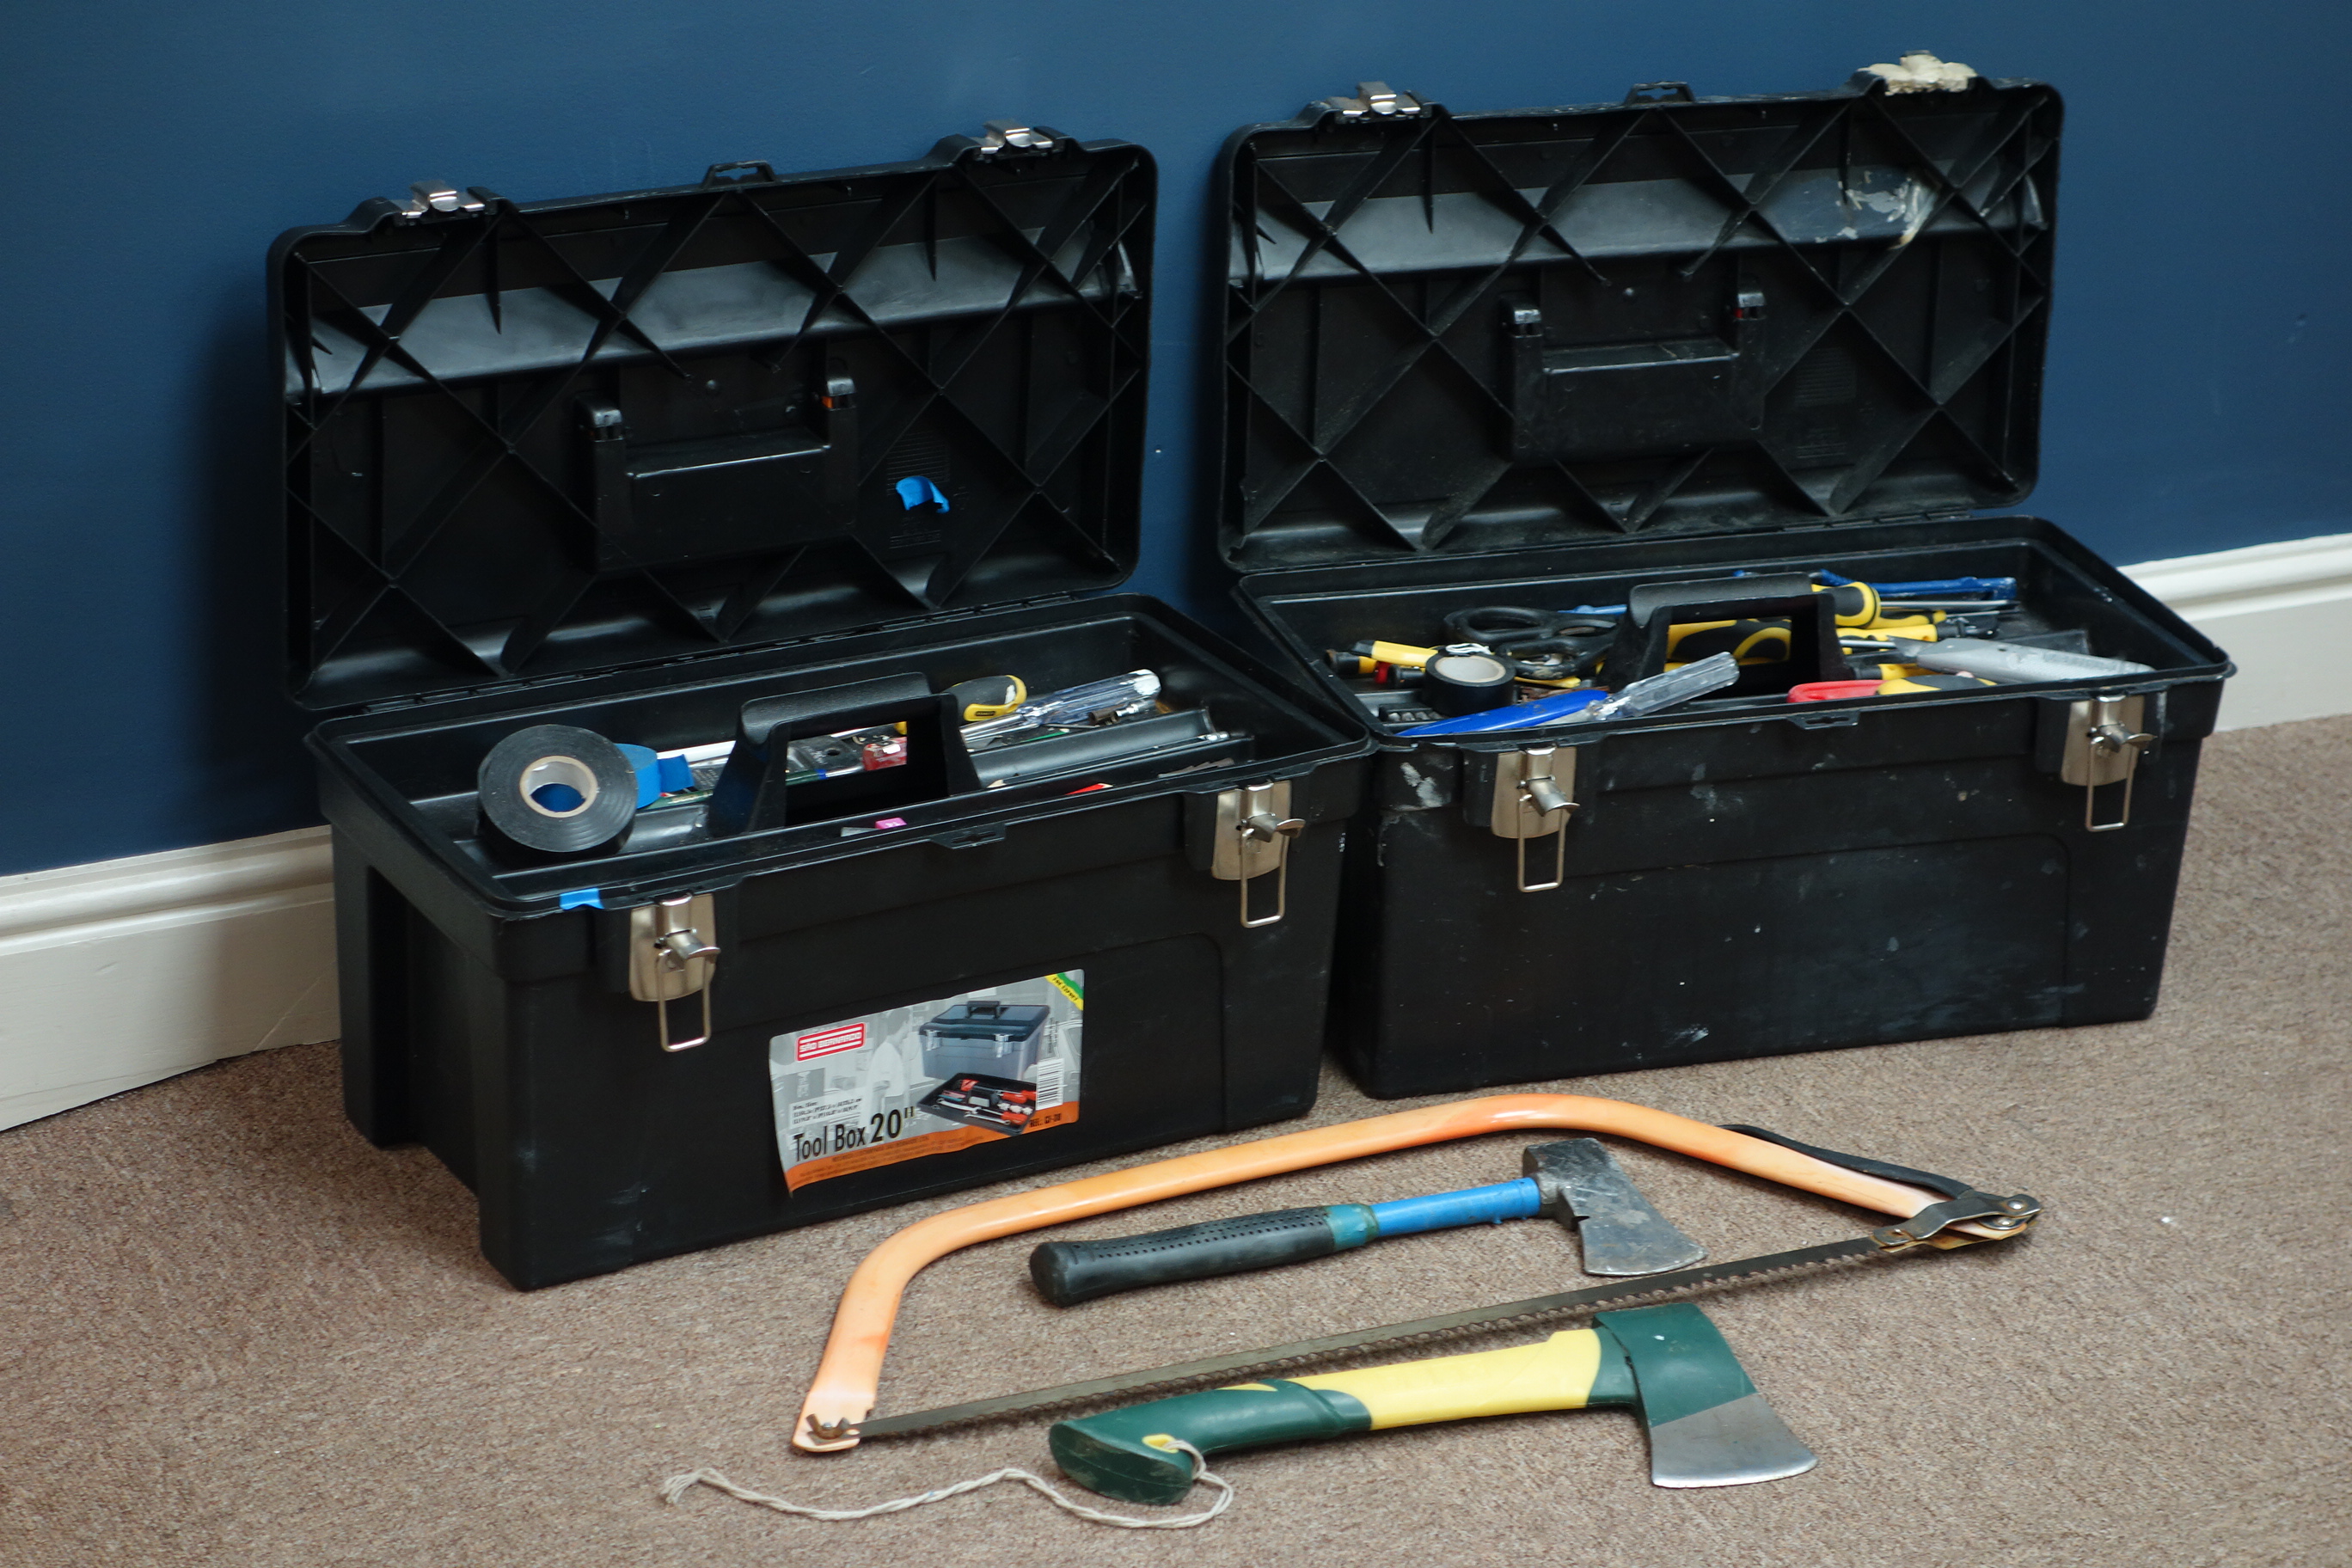 Stanley tool box and three other tool boxed with various tools and Faithfull multi-beam laser level - Bild 2 aus 2